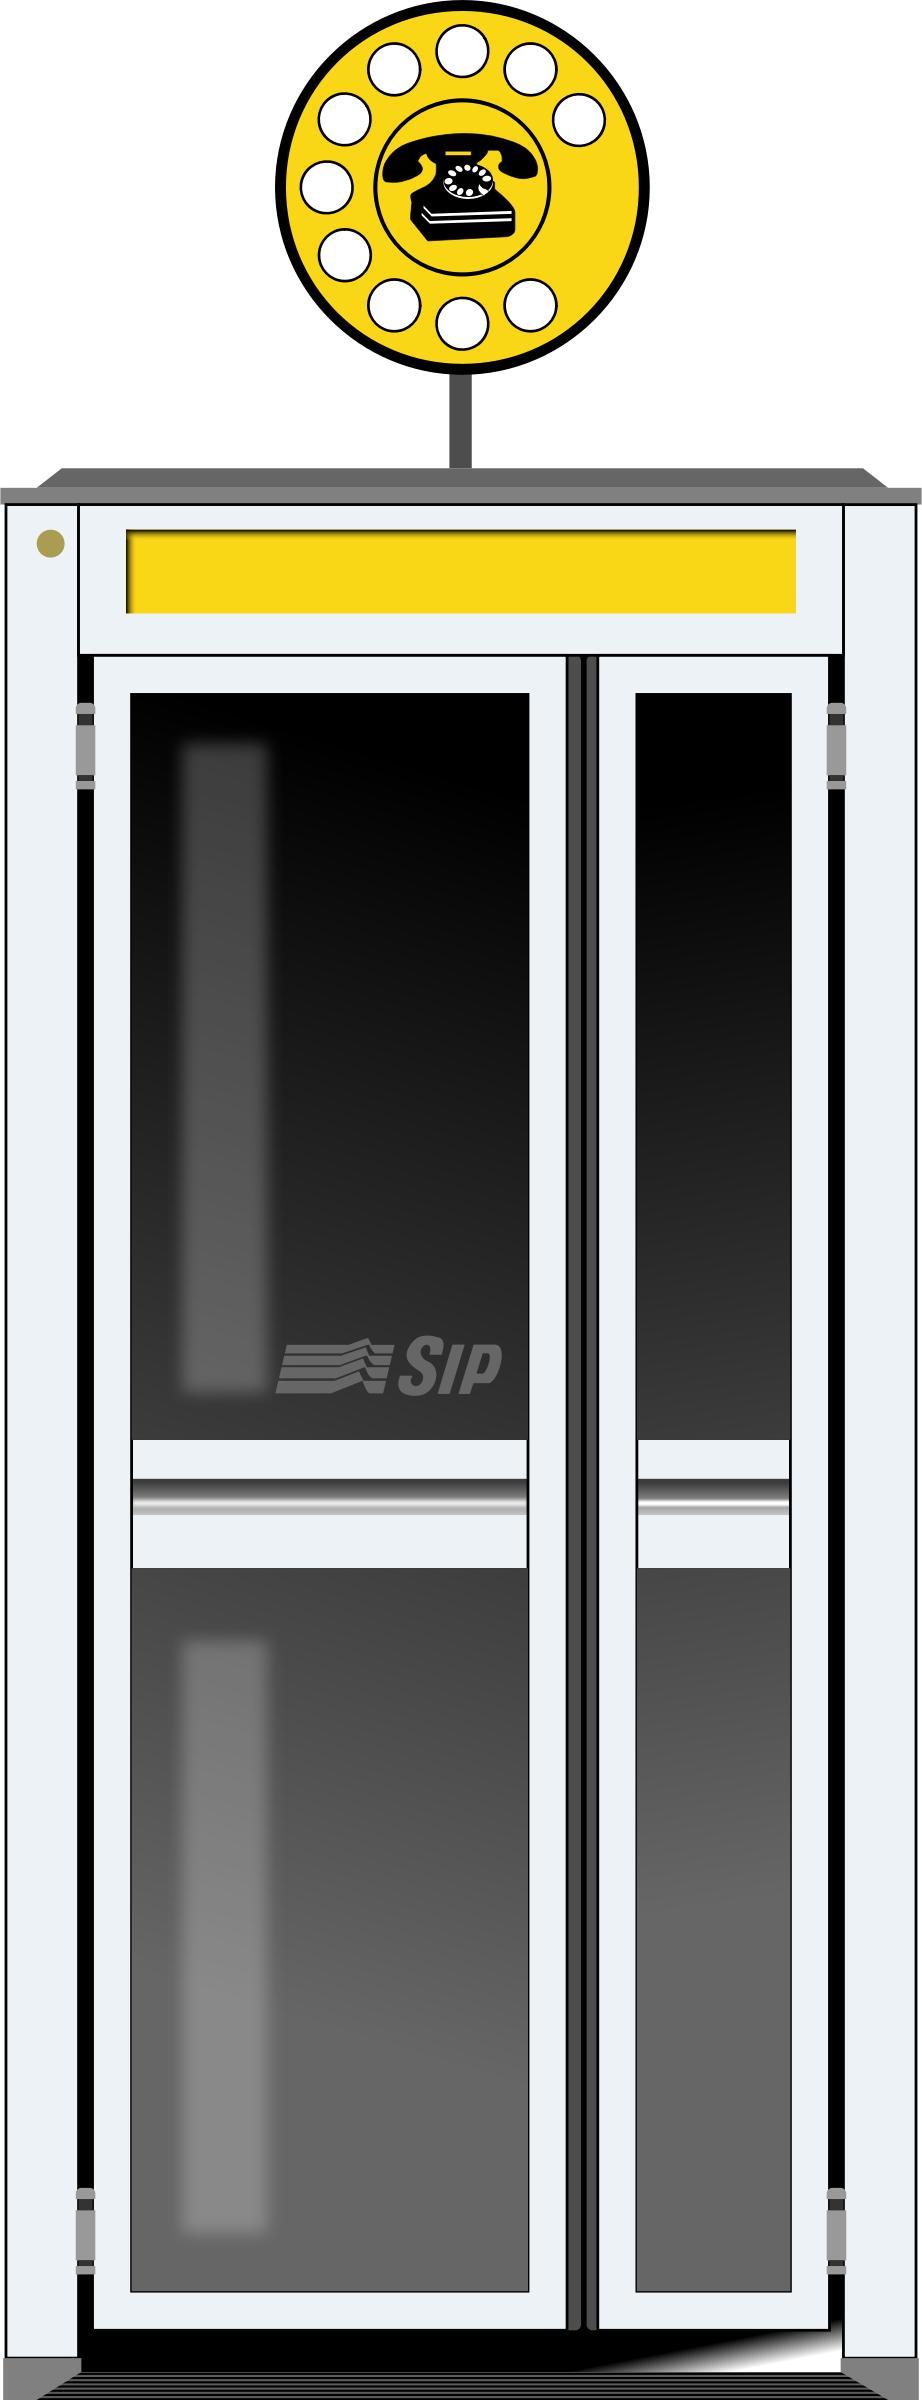 Telephone booth png transparent